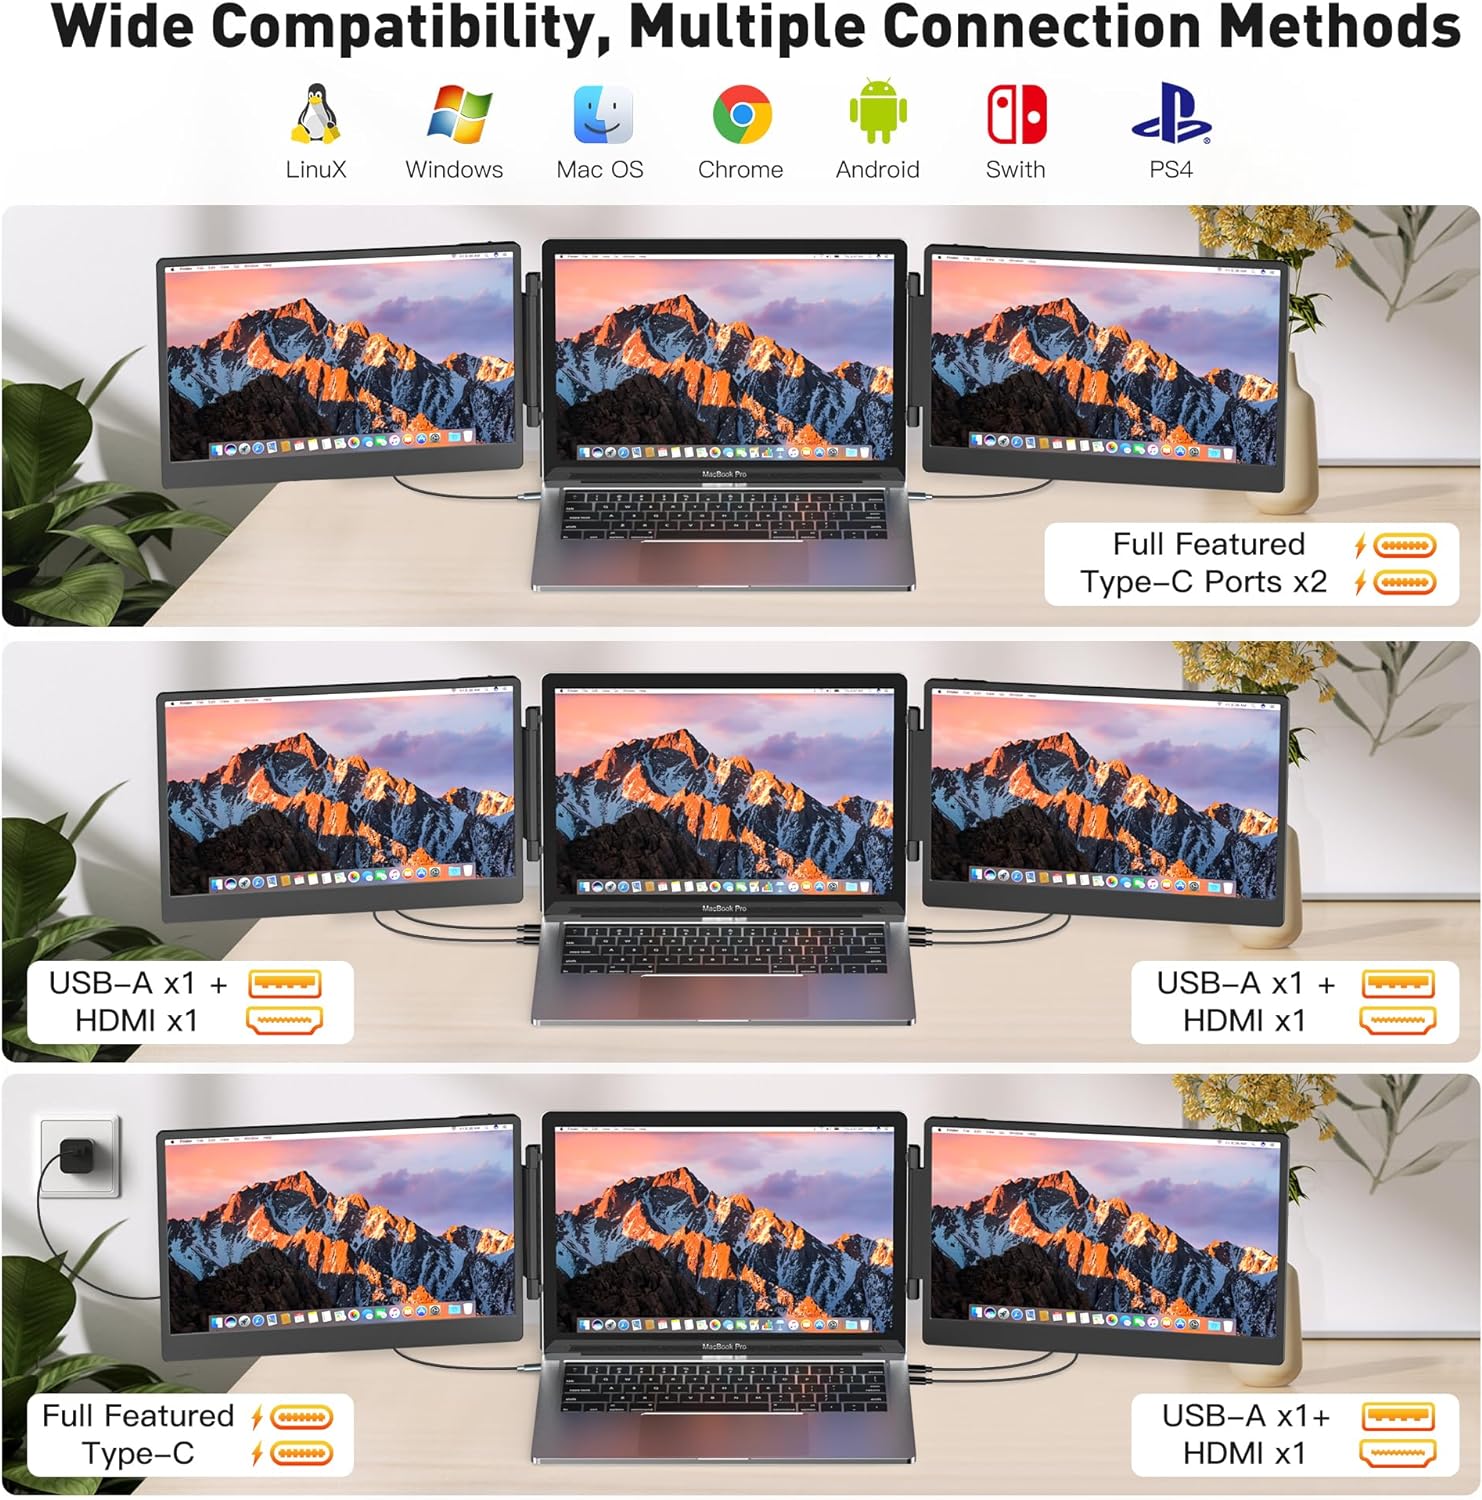 kwumsy S3 Triple Laptop Monitor Extender